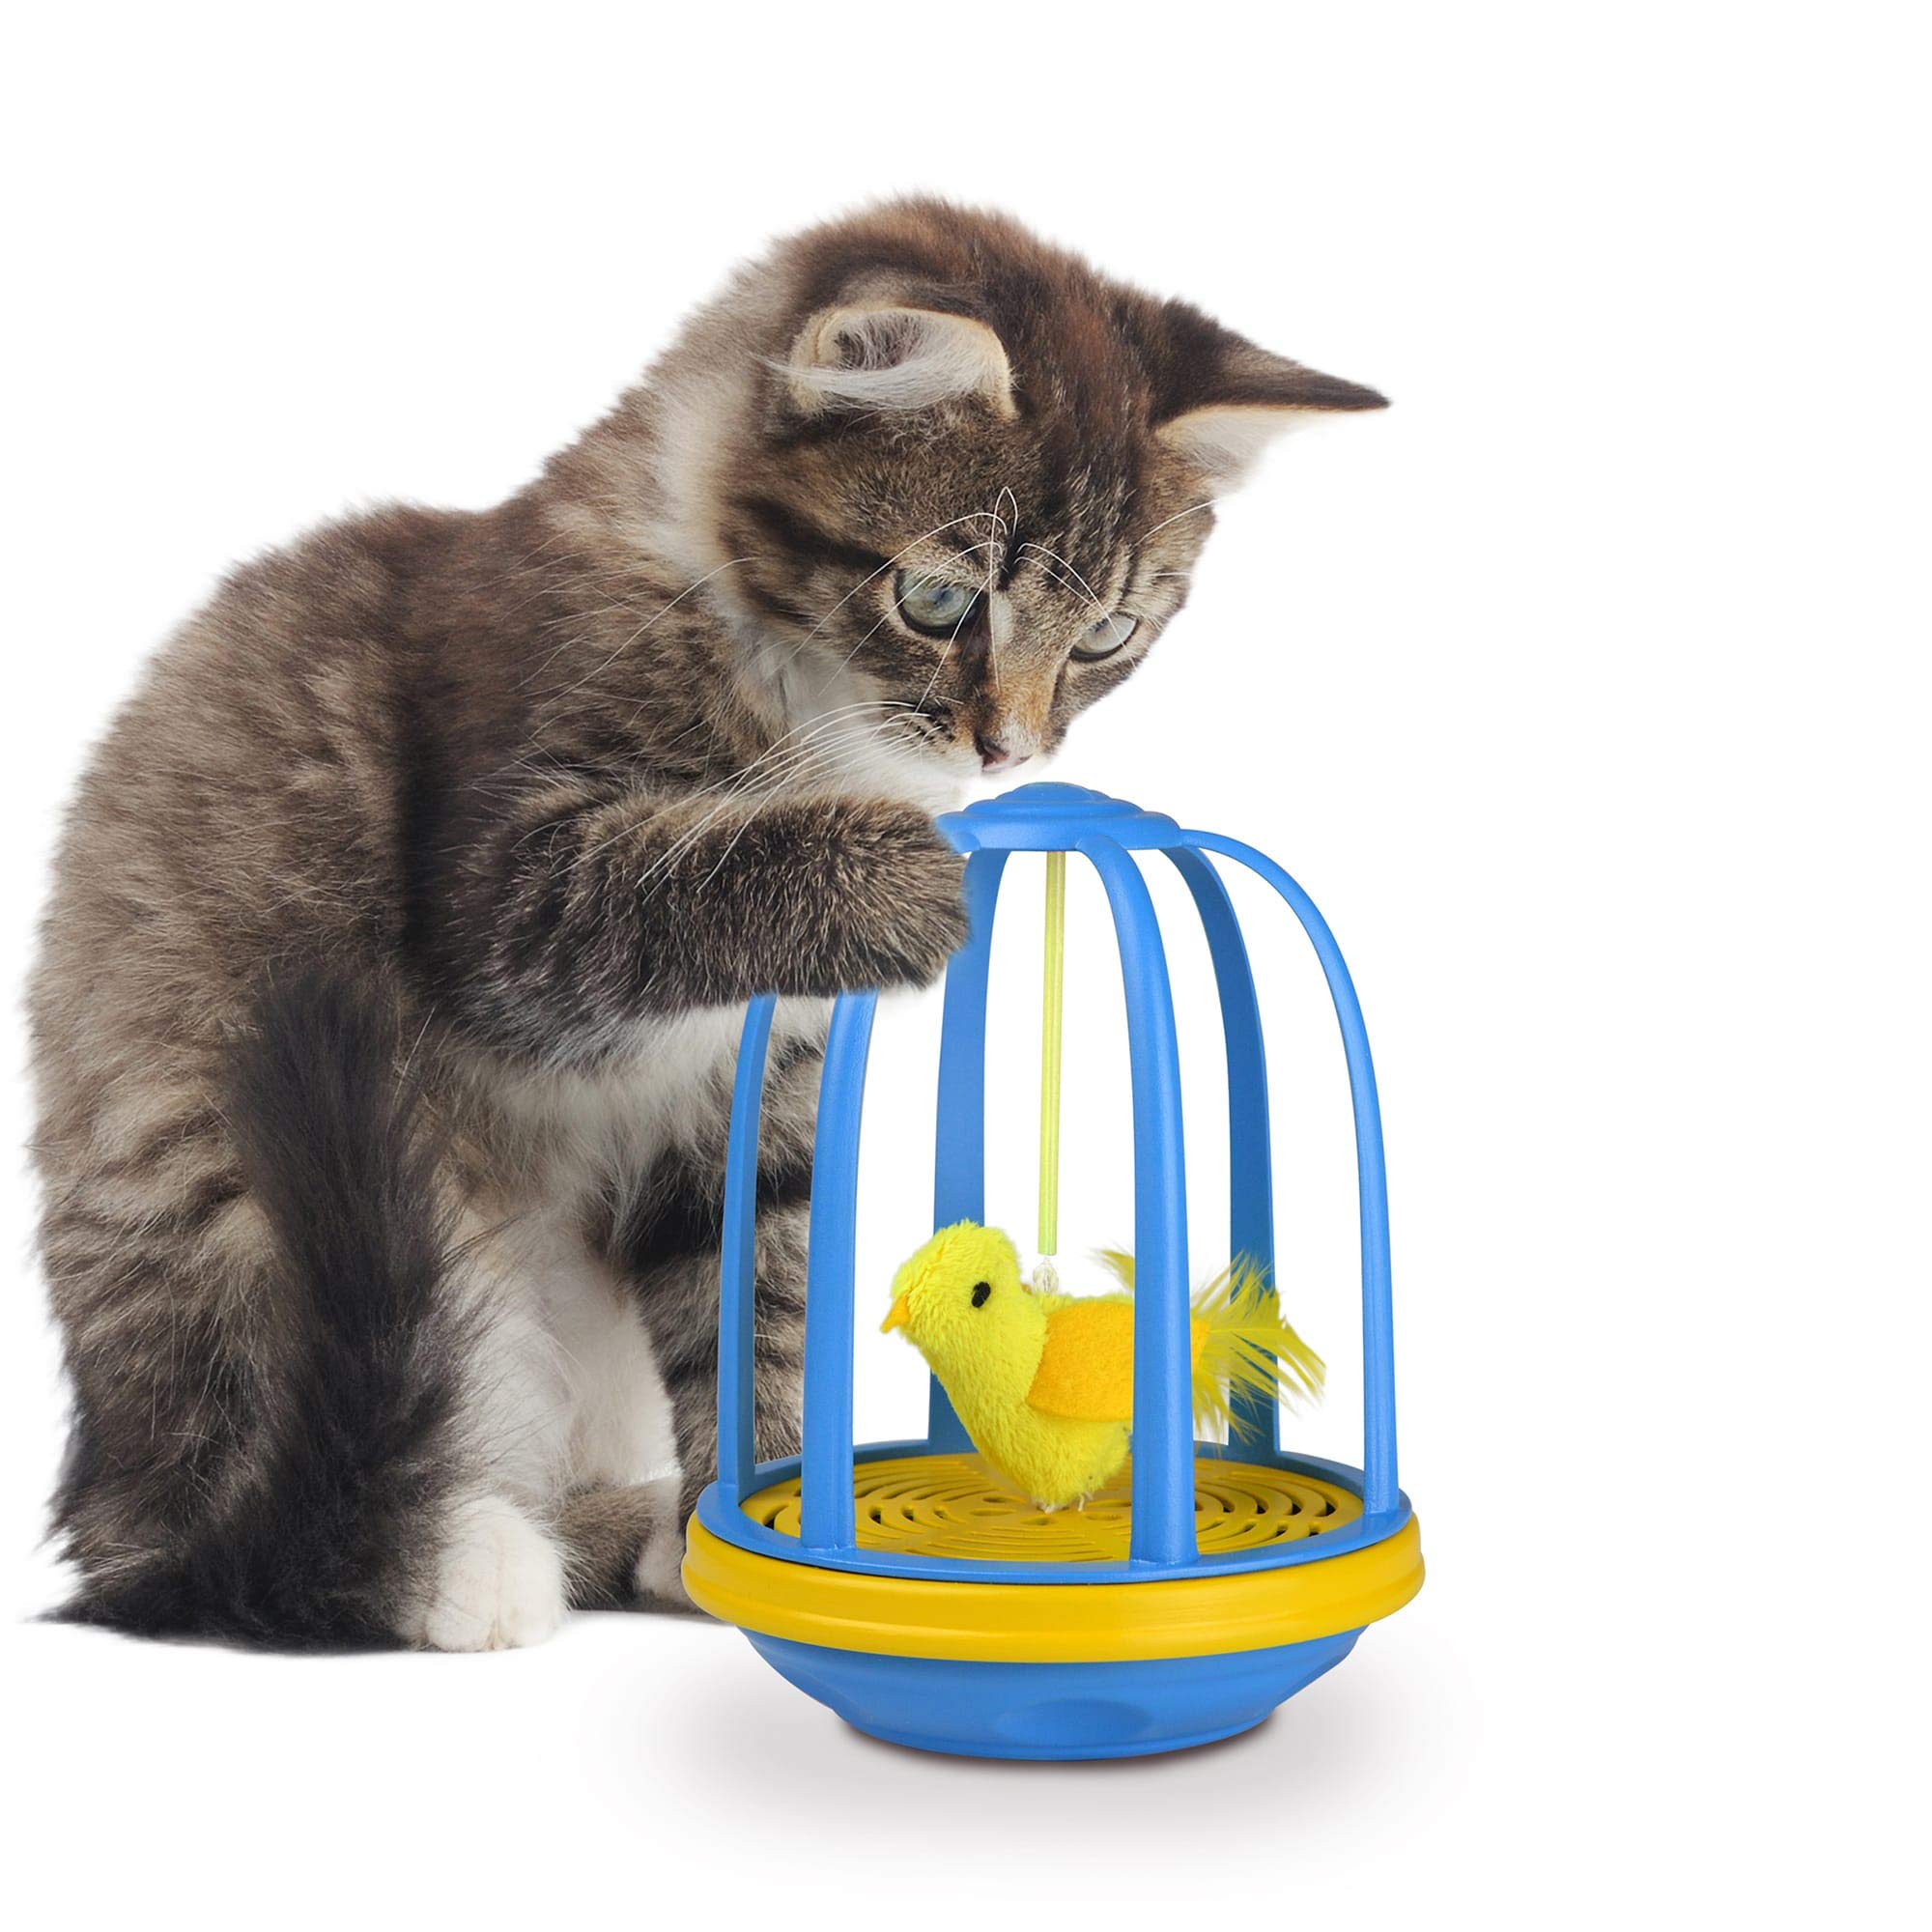 OurPets Bird In Cage Electronic Teasing Bird Soundmaking Cat Toy - Blue/Yellow  